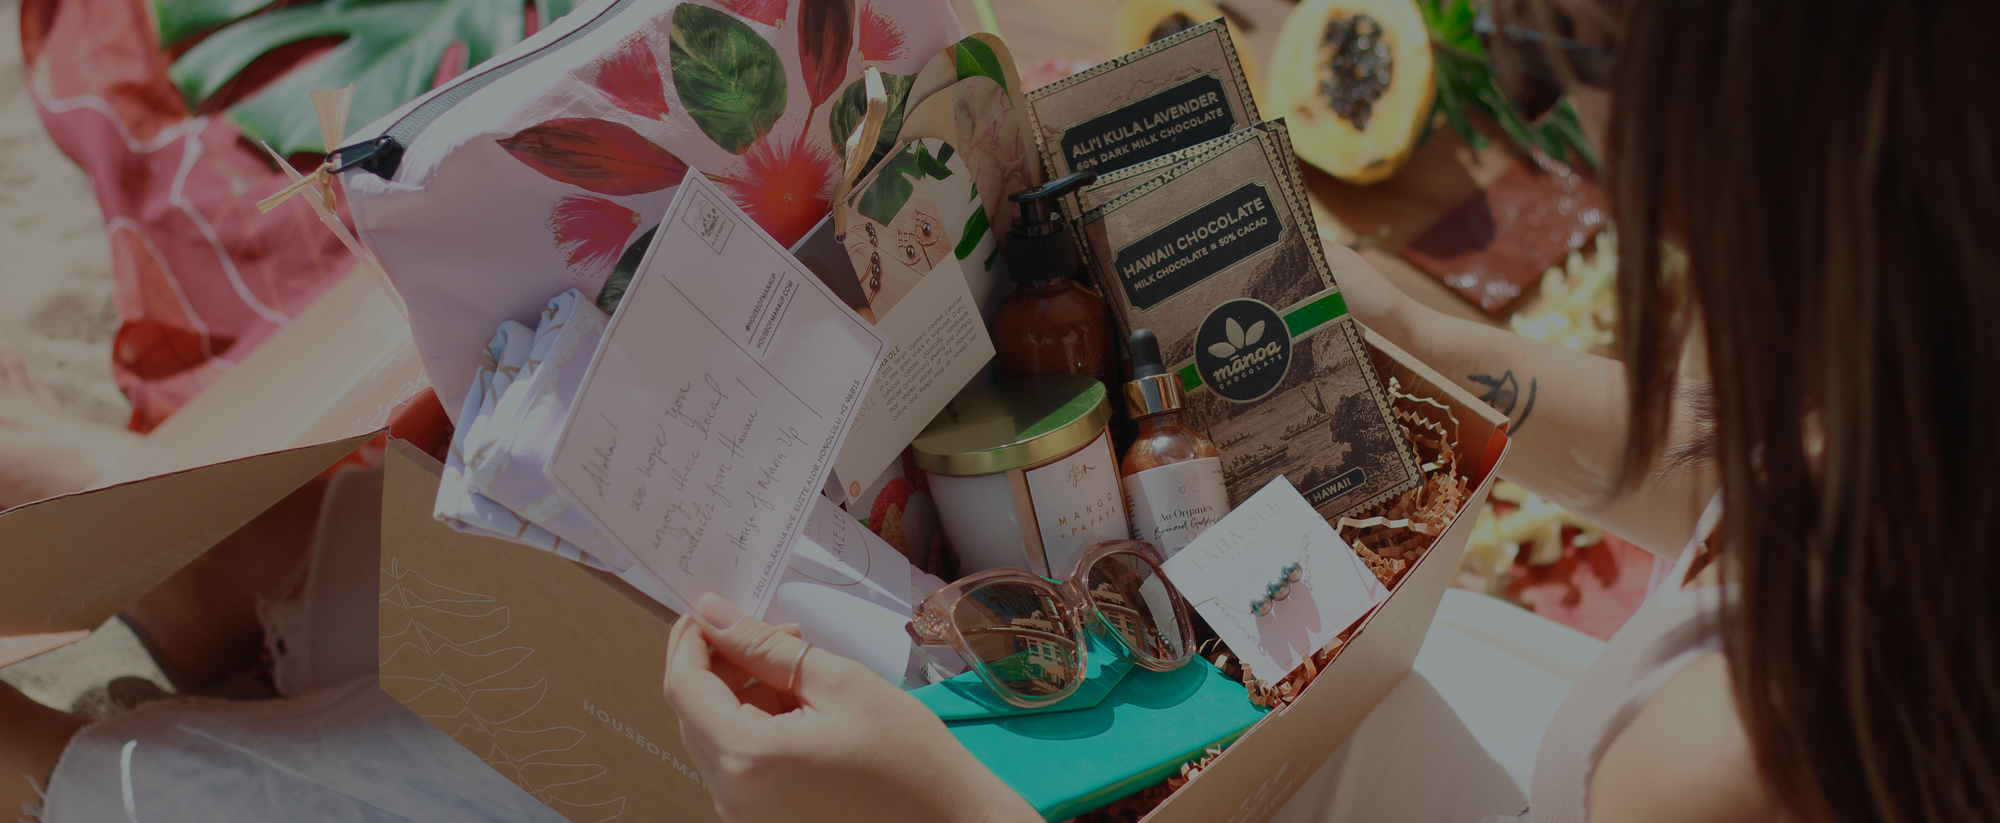 Woman going through a hawaiian gift box full of different items